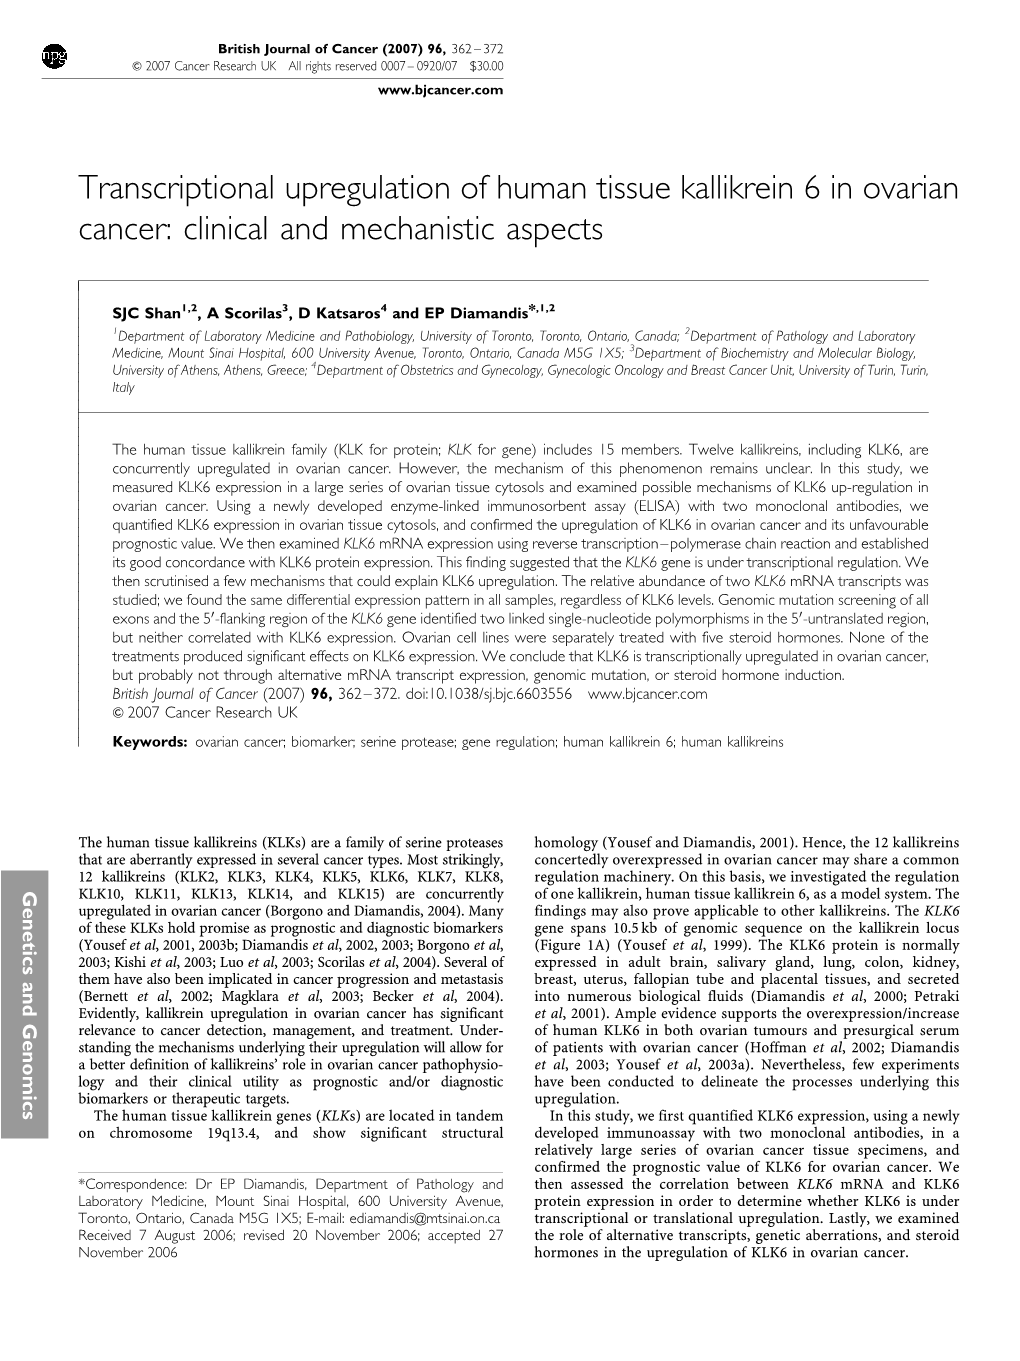 Transcriptional Upregulation of Human Tissue Kallikrein 6 in Ovarian Cancer: Clinical and Mechanistic Aspects